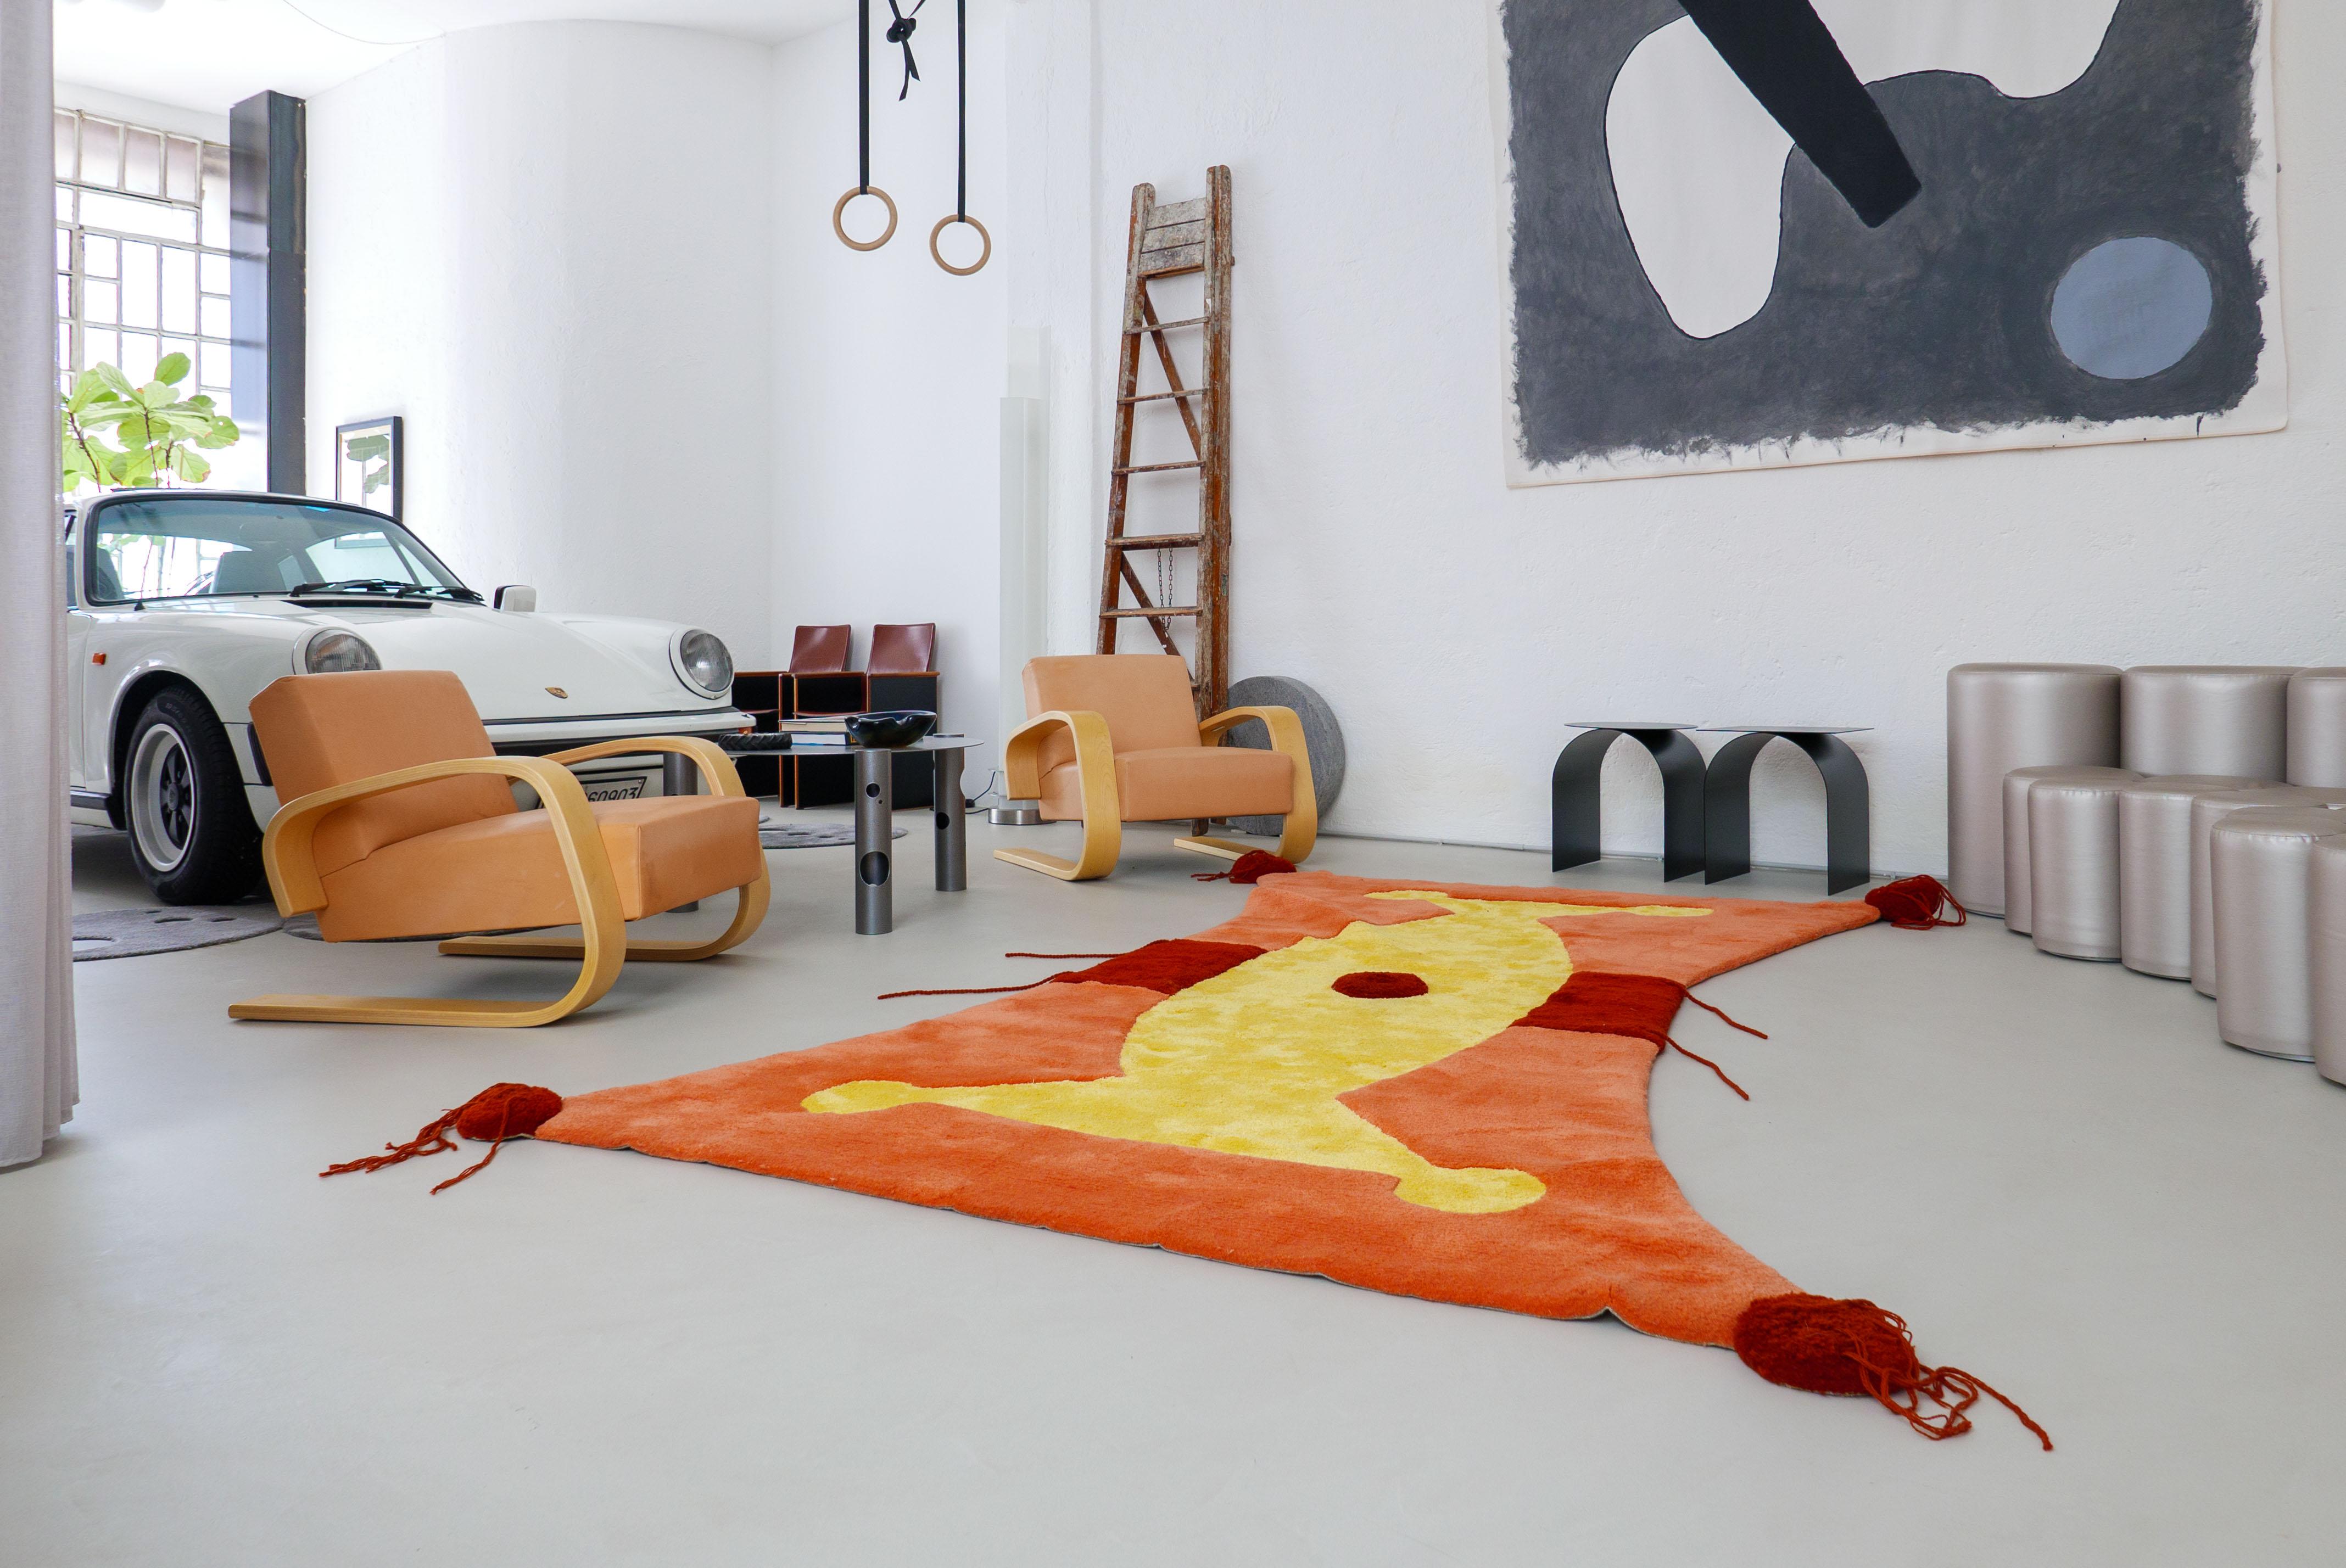 Vintage wool rug, designed in 1990 by Claude Picasso, son of Pablo, and manufactured by Danish brand Rapsel. The rug, hand-knotted in vibrant tones of salmon, yellow and burgundy wool, is extremely wide - measuring 3 by 2 meters. It is preserved in